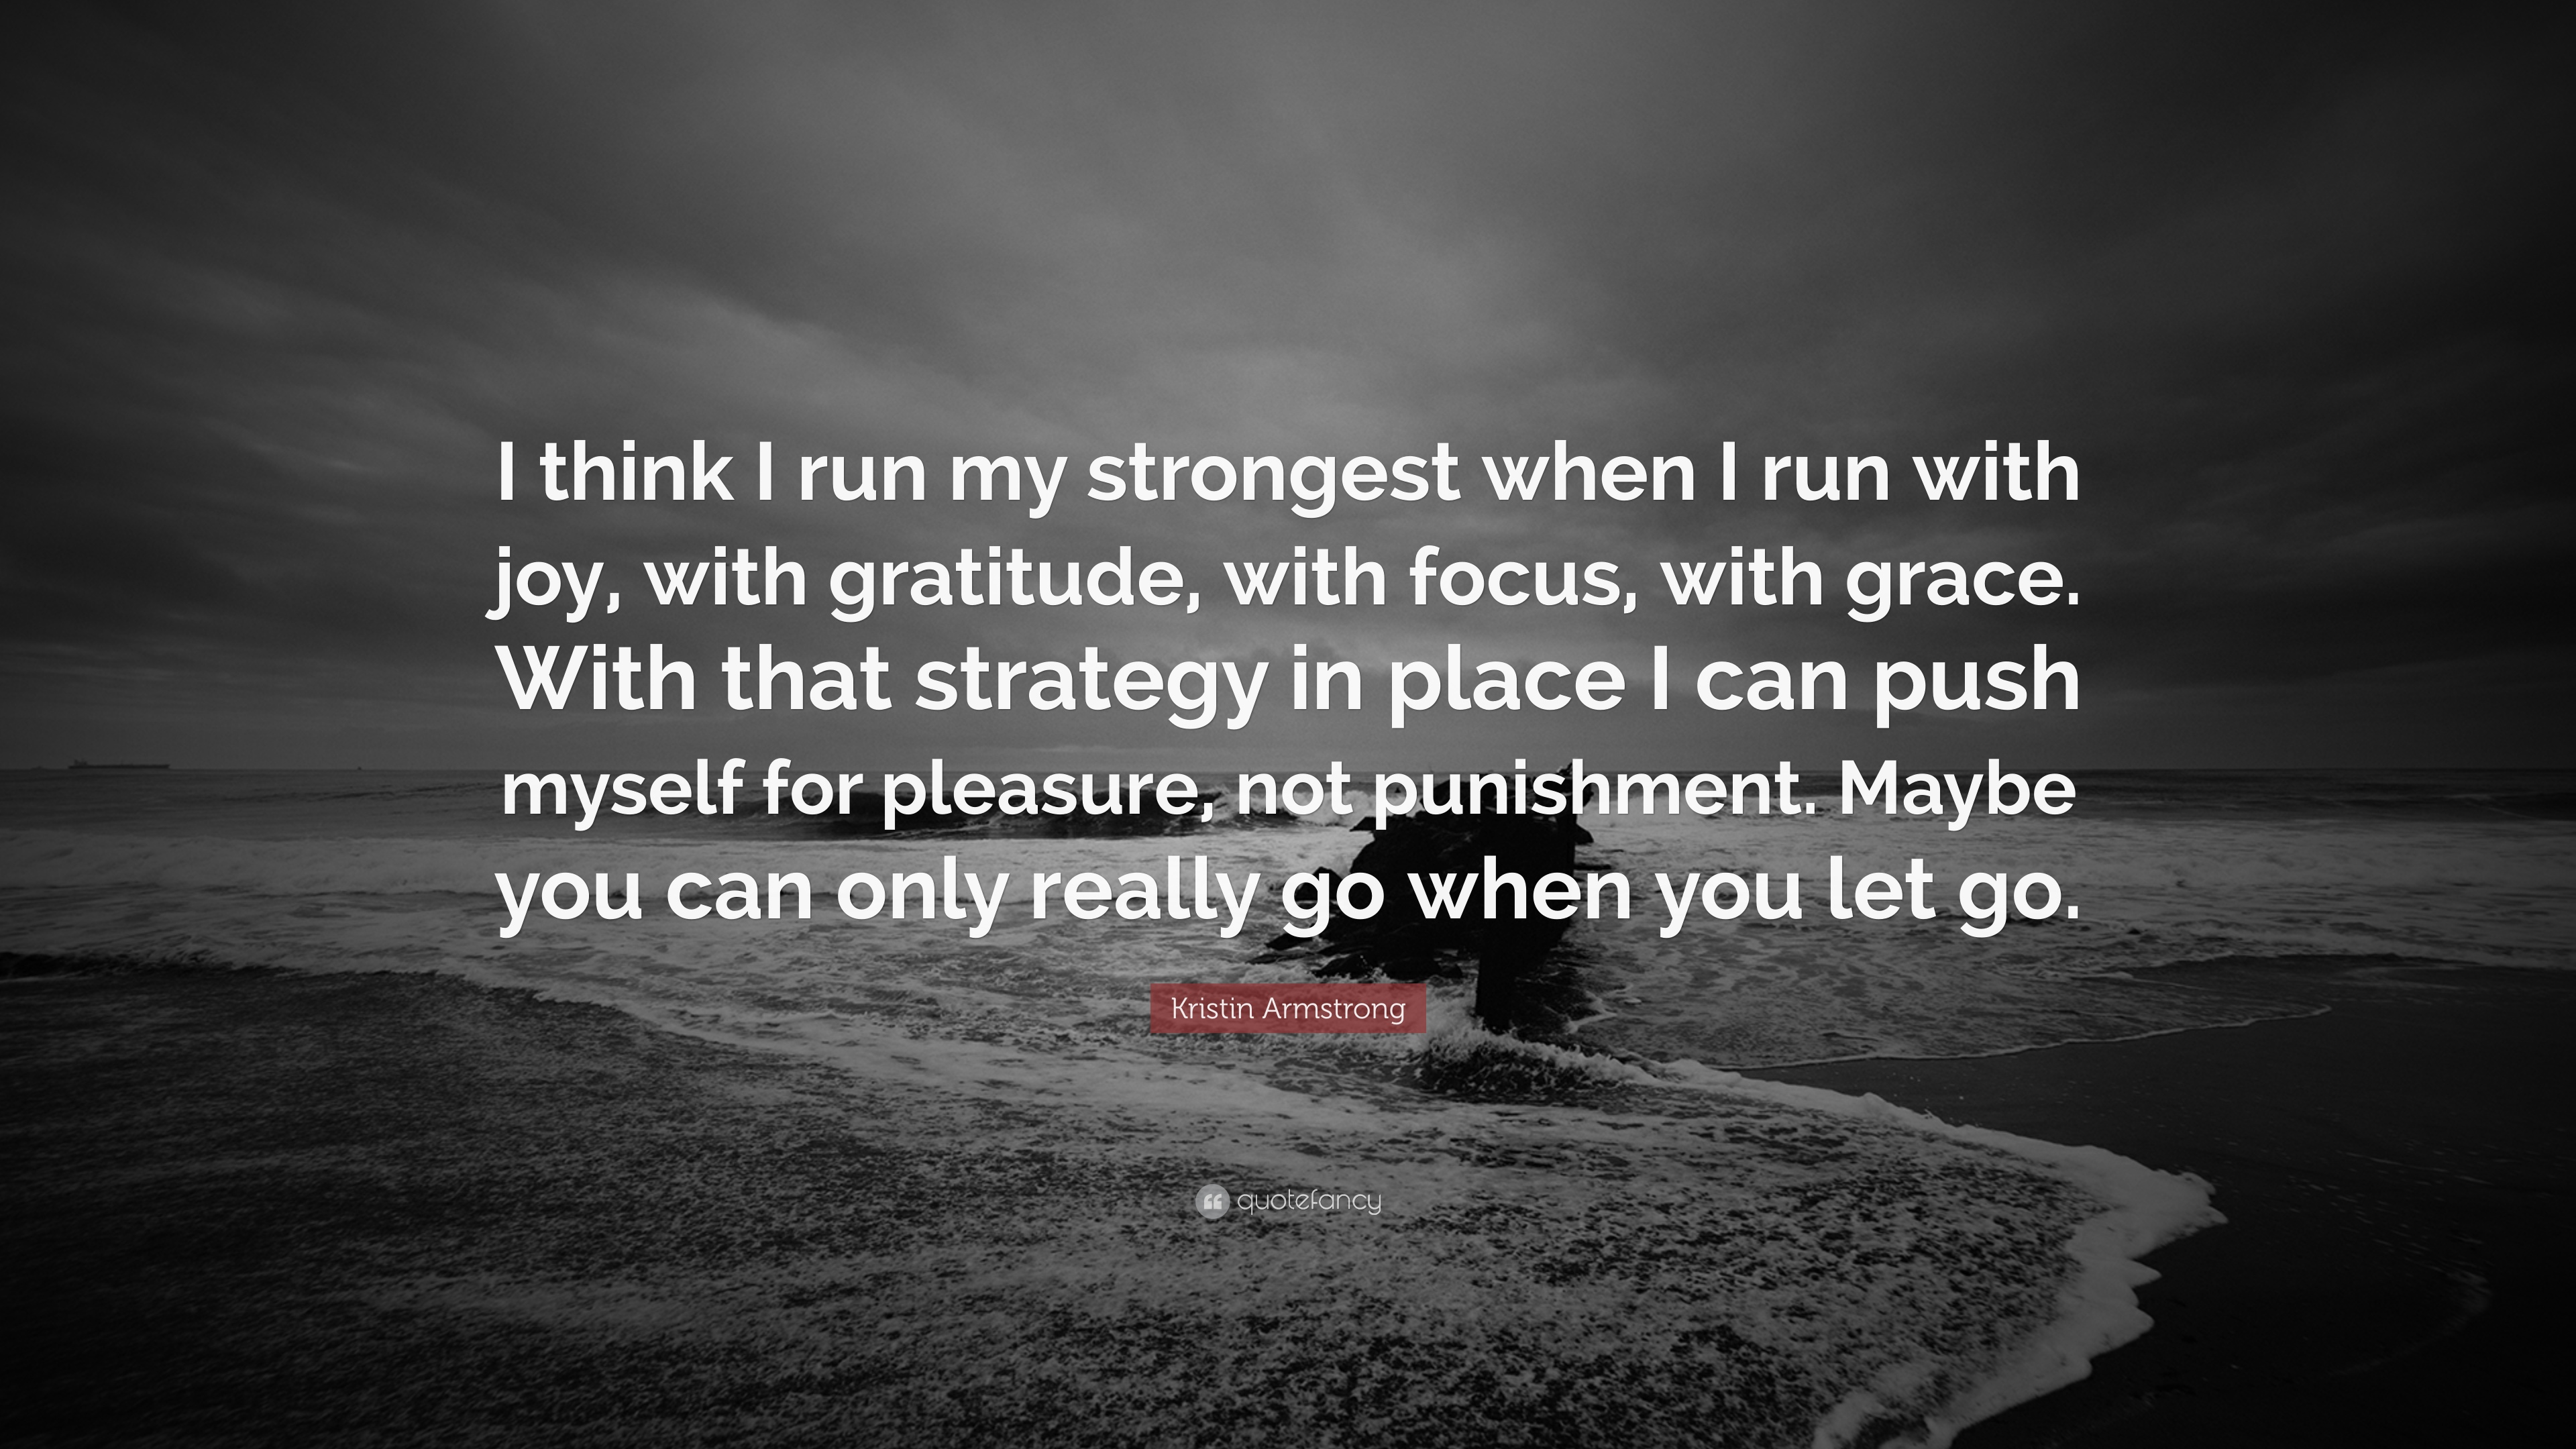 Kristin Armstrong Quote: “I think I run my strongest when I run with ...